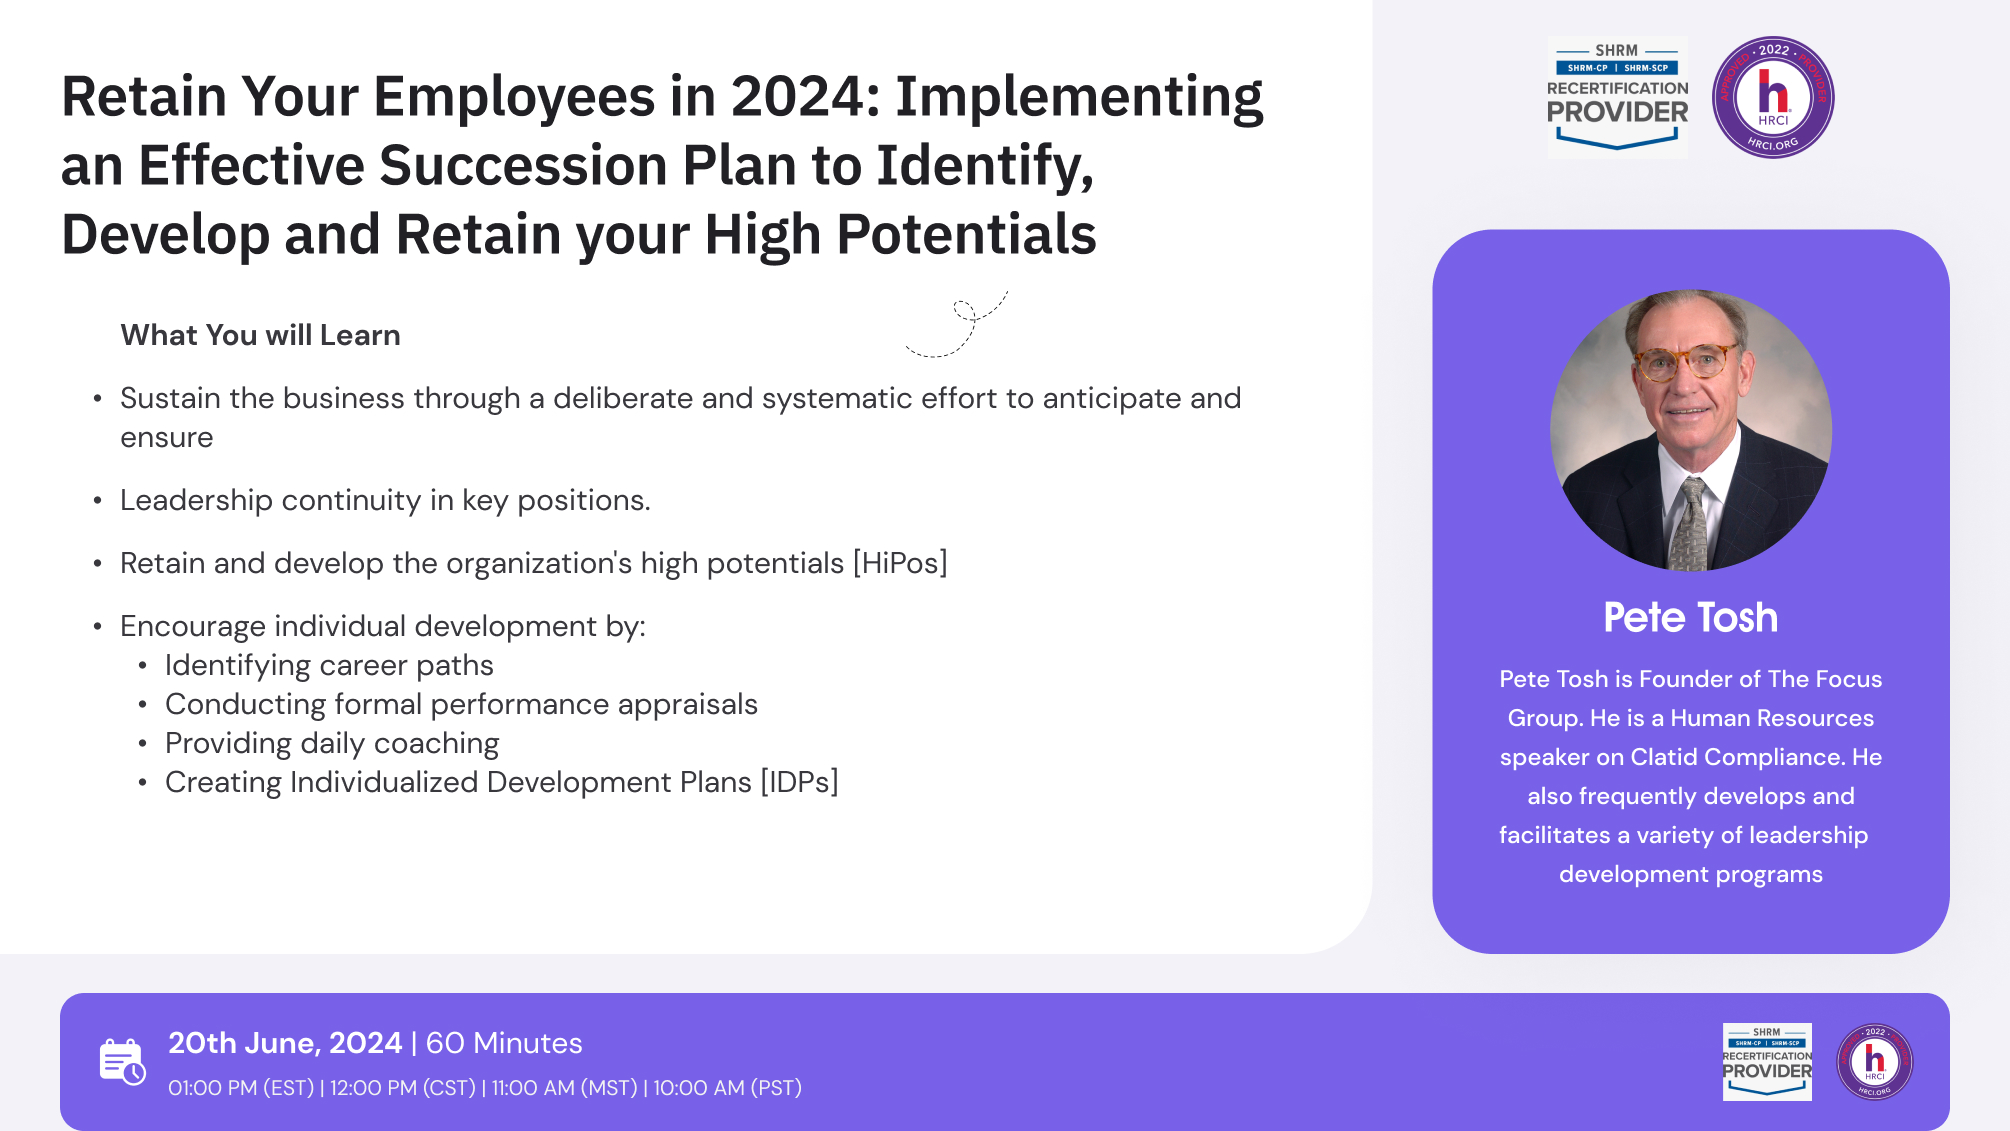 Retain Your Employees in 2024: Implementing an Effective Succession Plan to Identify, Develop and Retain your High Potentials